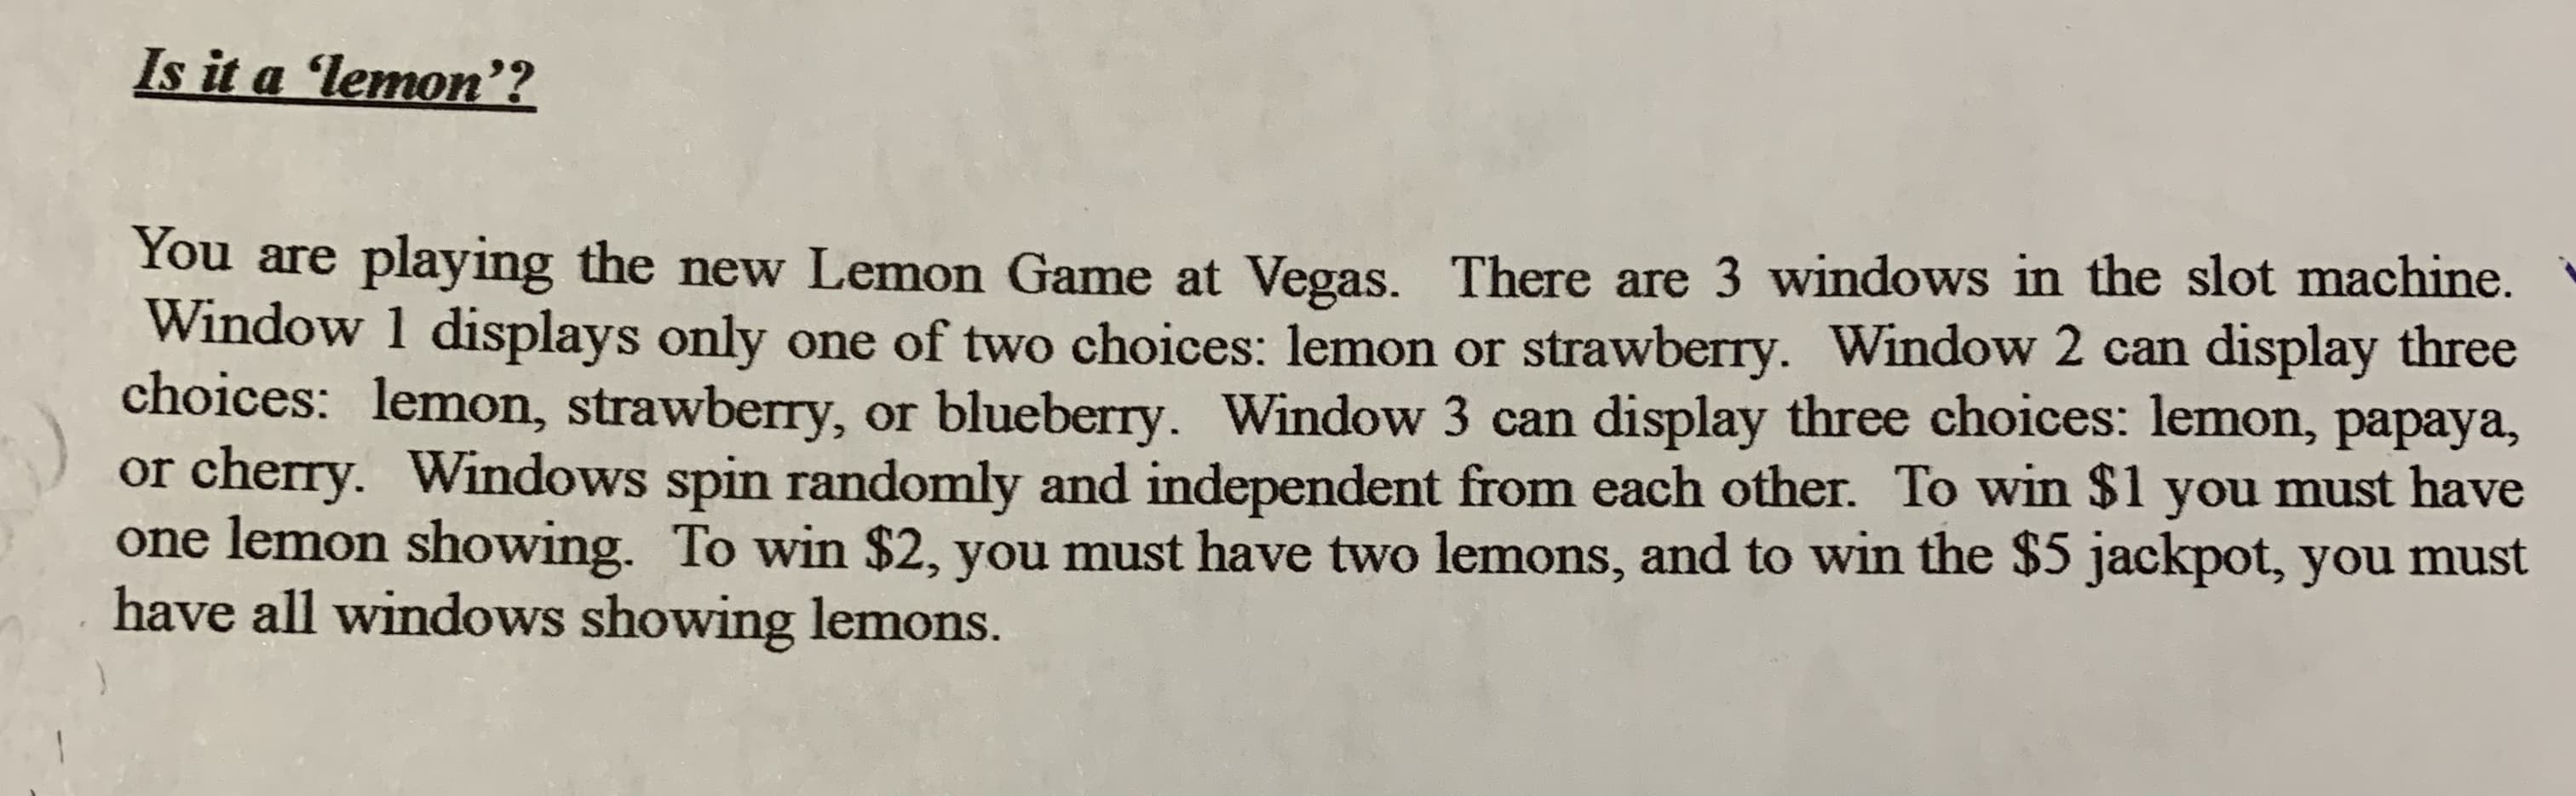 Is it a 'lemon'?
You are playing the new Lemon Game at Vegas. There are 3 windows in the slot machine.
Window 1 displays only one of two choices: lemon or strawberry. Window 2 can display three
choices: lemon, strawberry, or blueberry. Window
cherry. Windows spin randomly and independent from each other. To win $1 you must have
lemon showing. To win $2, you must have two lemons, and to win the $5 jackpot, you must
have all windows showing lemons.
can display three choices: lemon, papaya,
